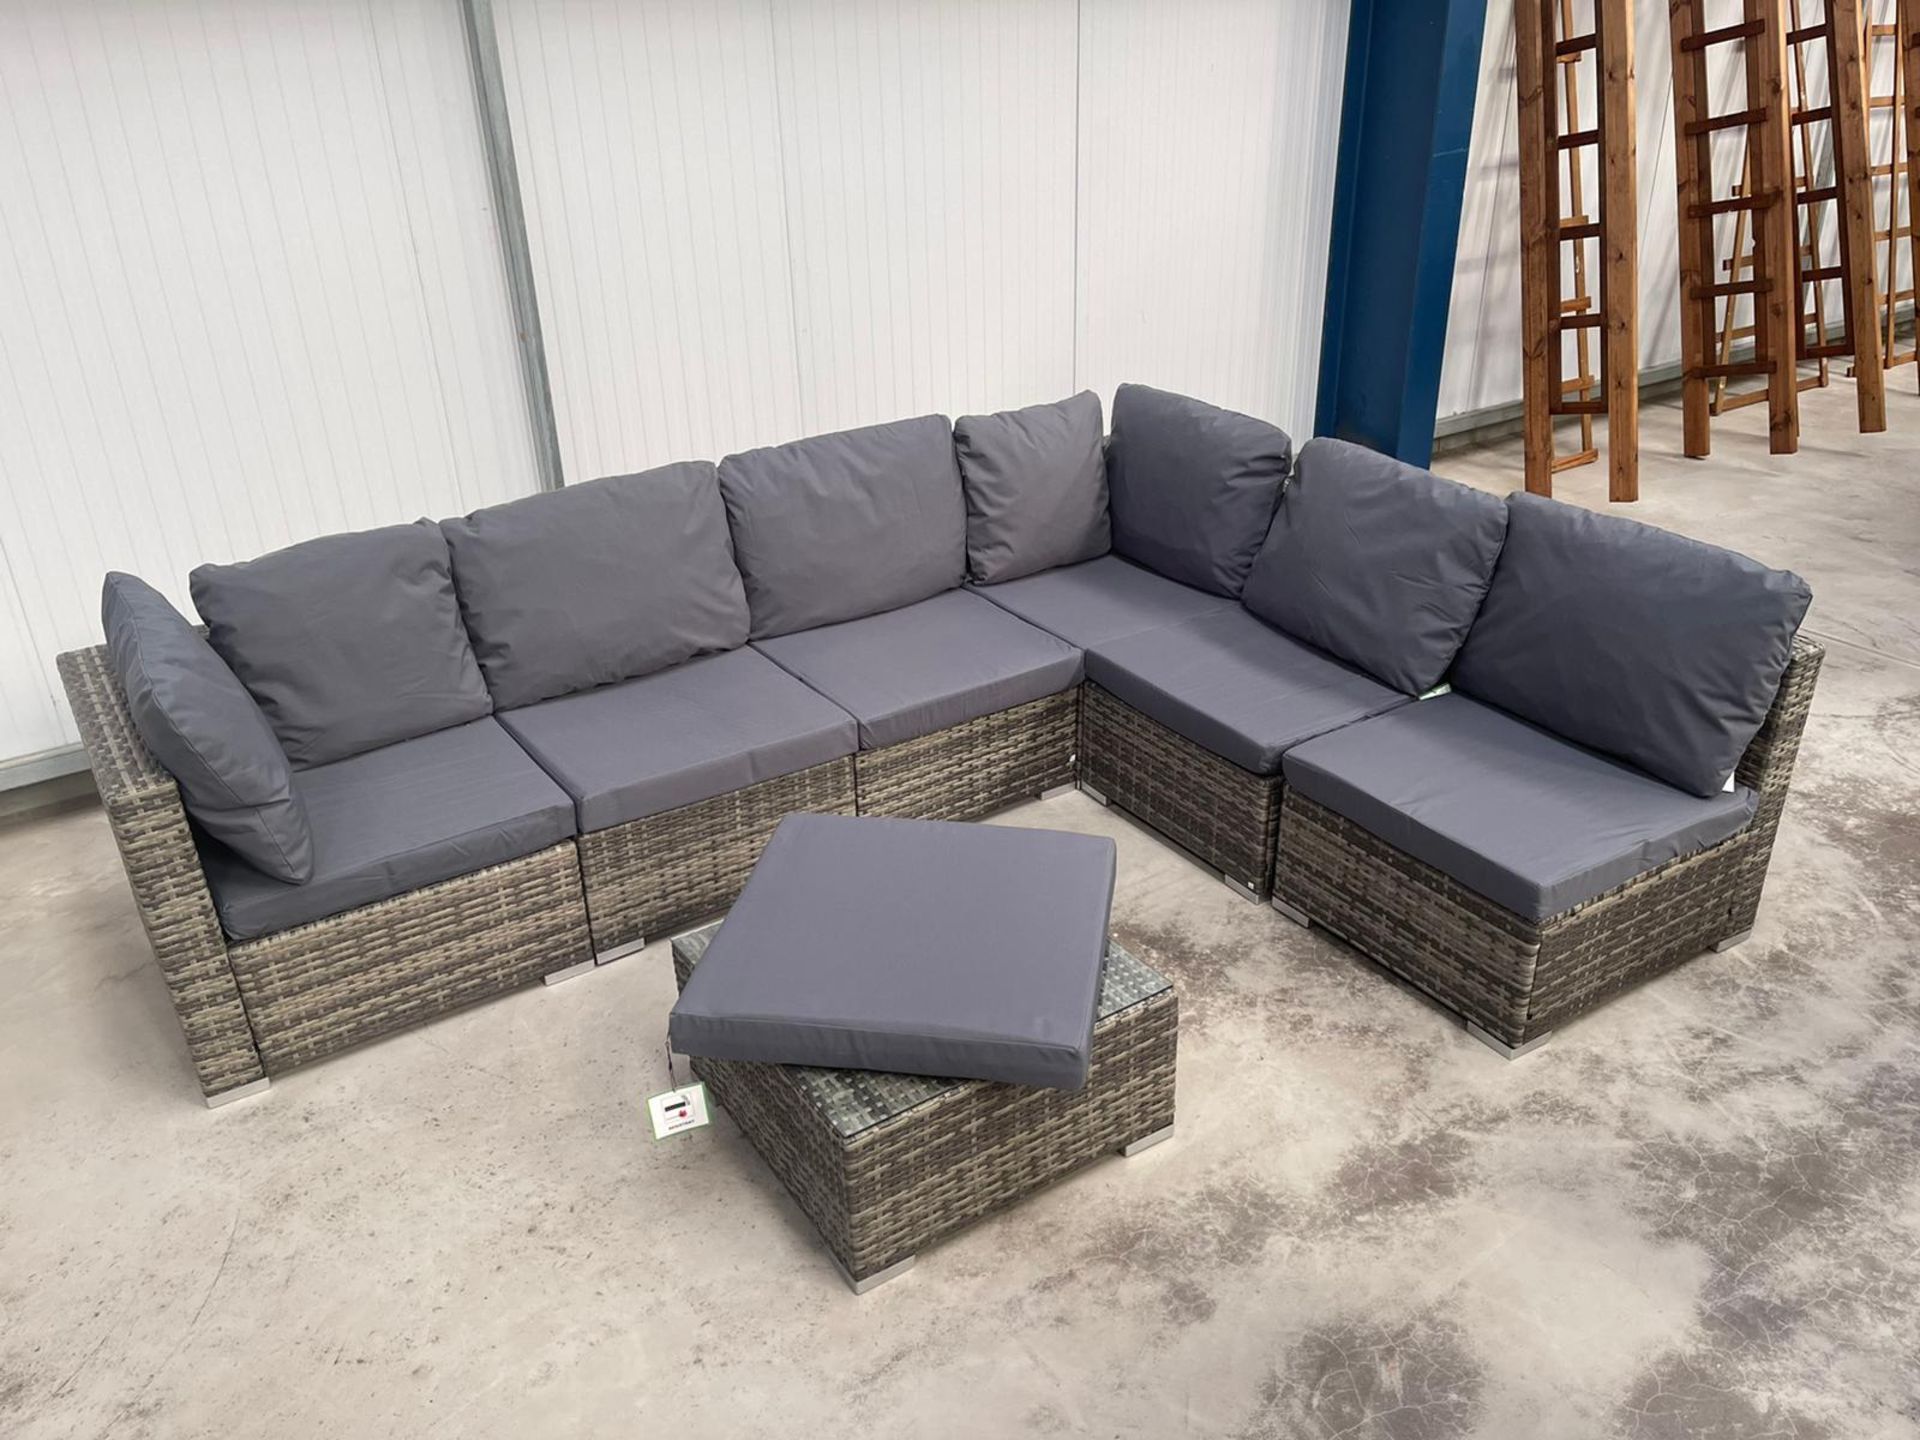 RRP Â£899 - NEW GREY U-SHAPED MODULAR SOFA WITH GLASS TOPPED COFFEE TABLE. VERY VERSITILE SET THAT - Image 4 of 9